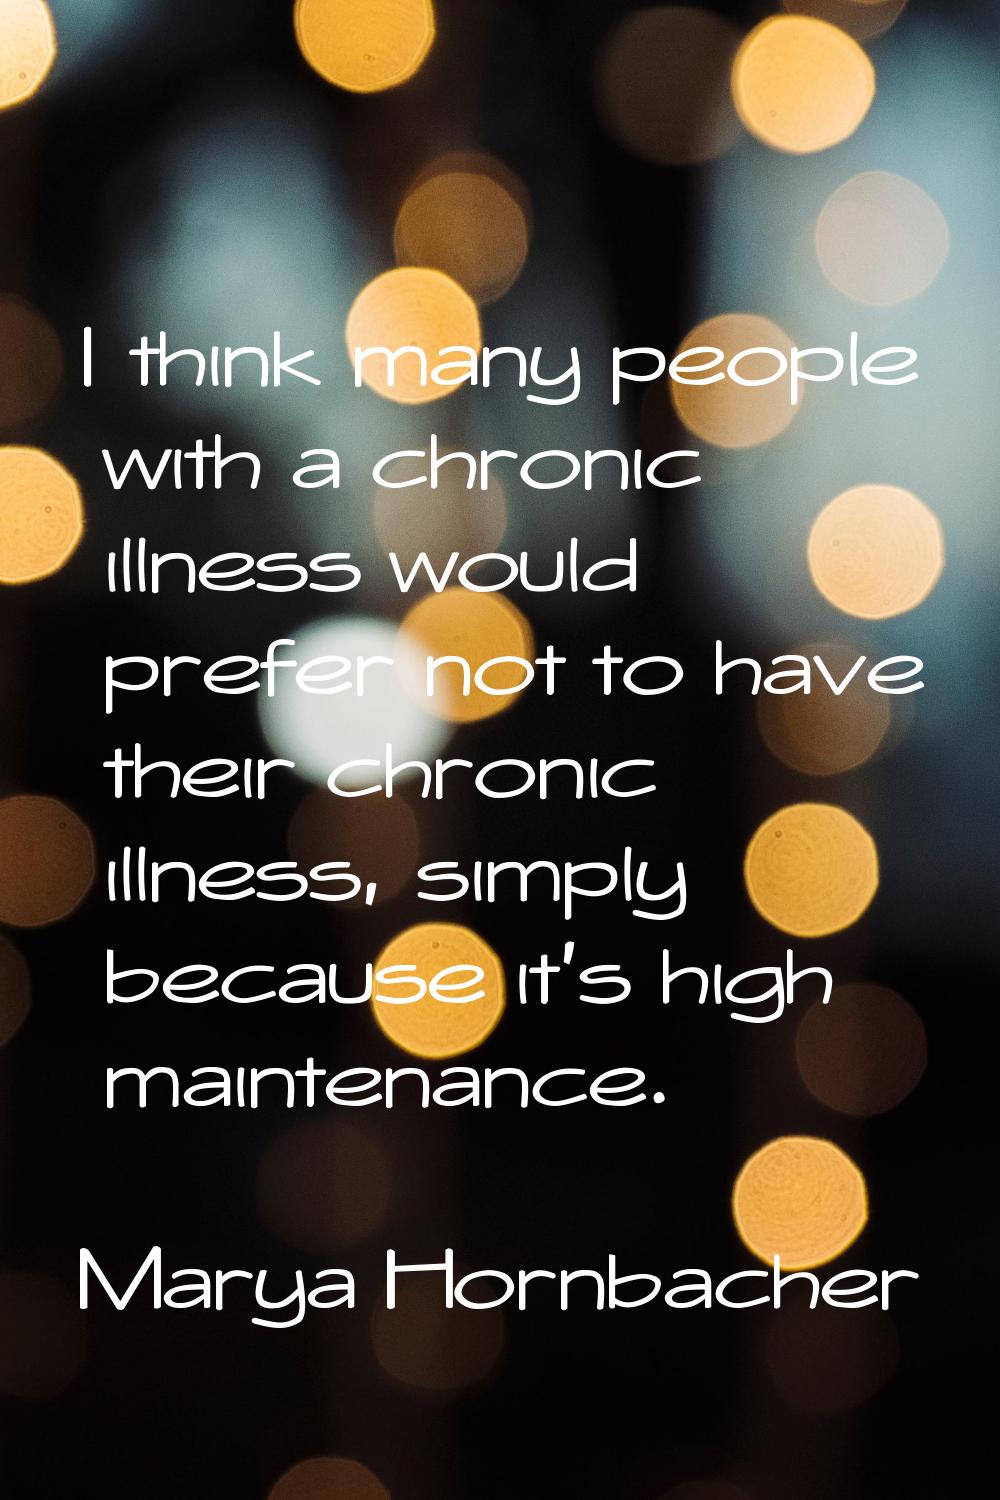 I think many people with a chronic illness would prefer not to have their chronic illness, simply b